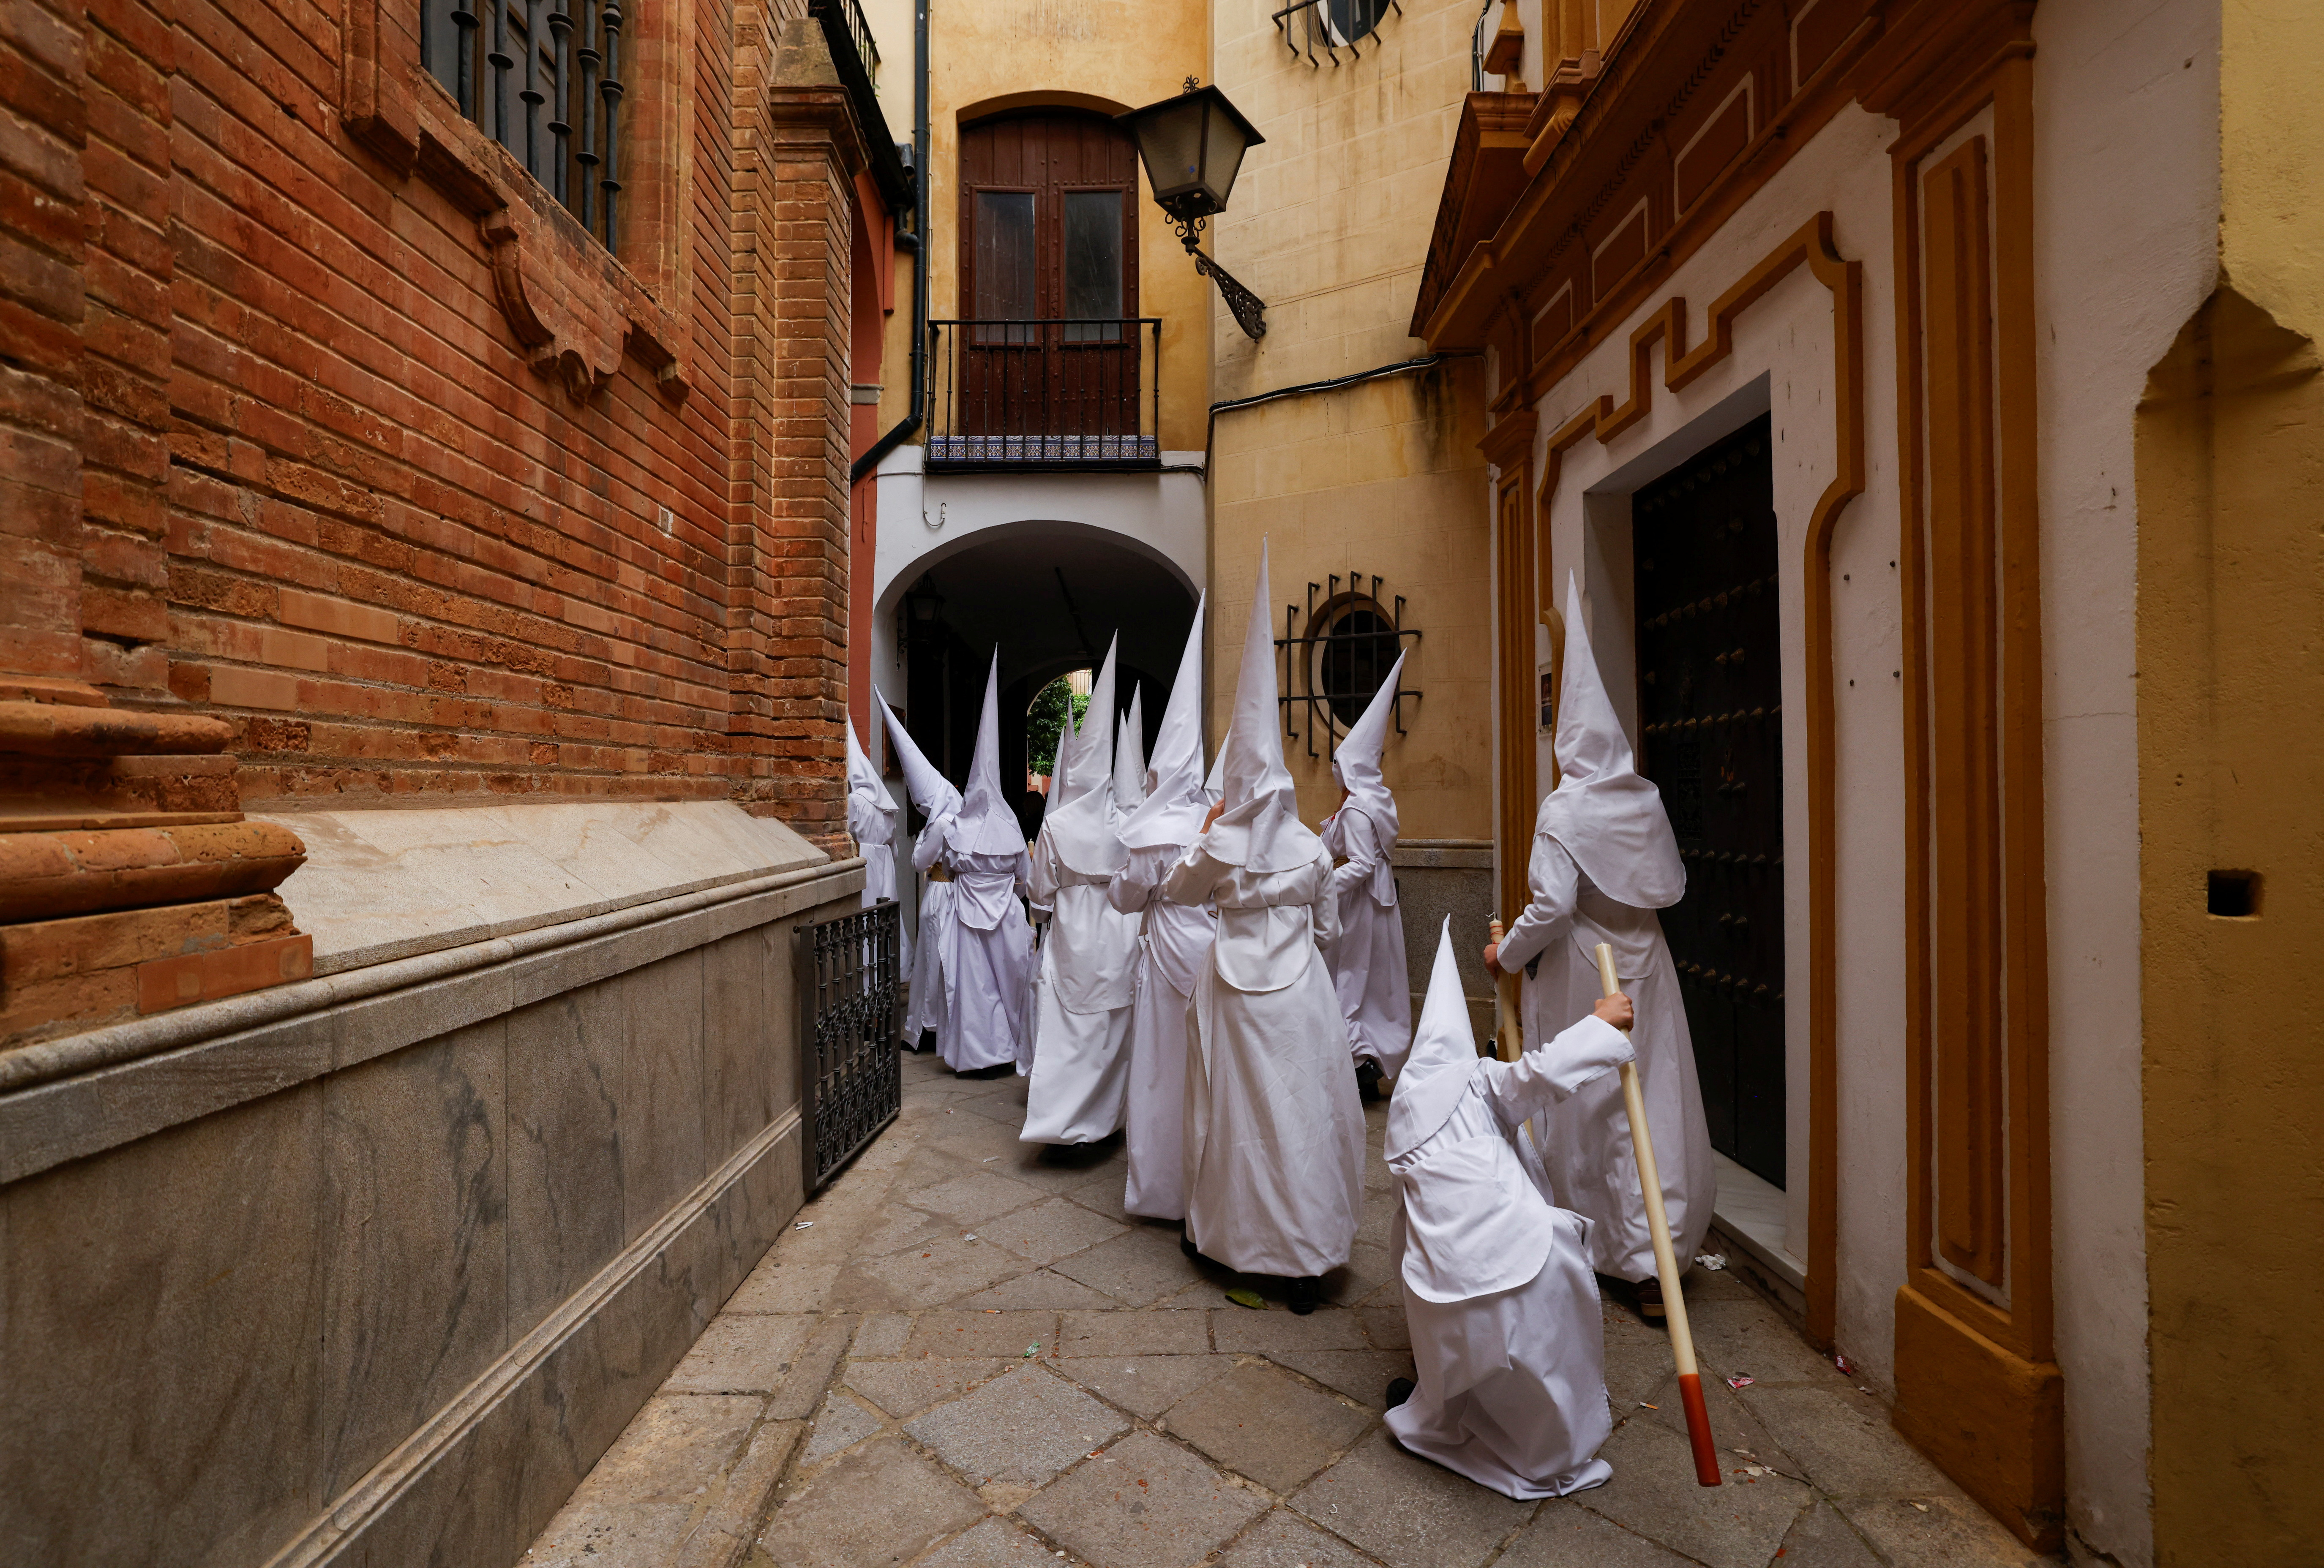 Holy Week procession in Spain